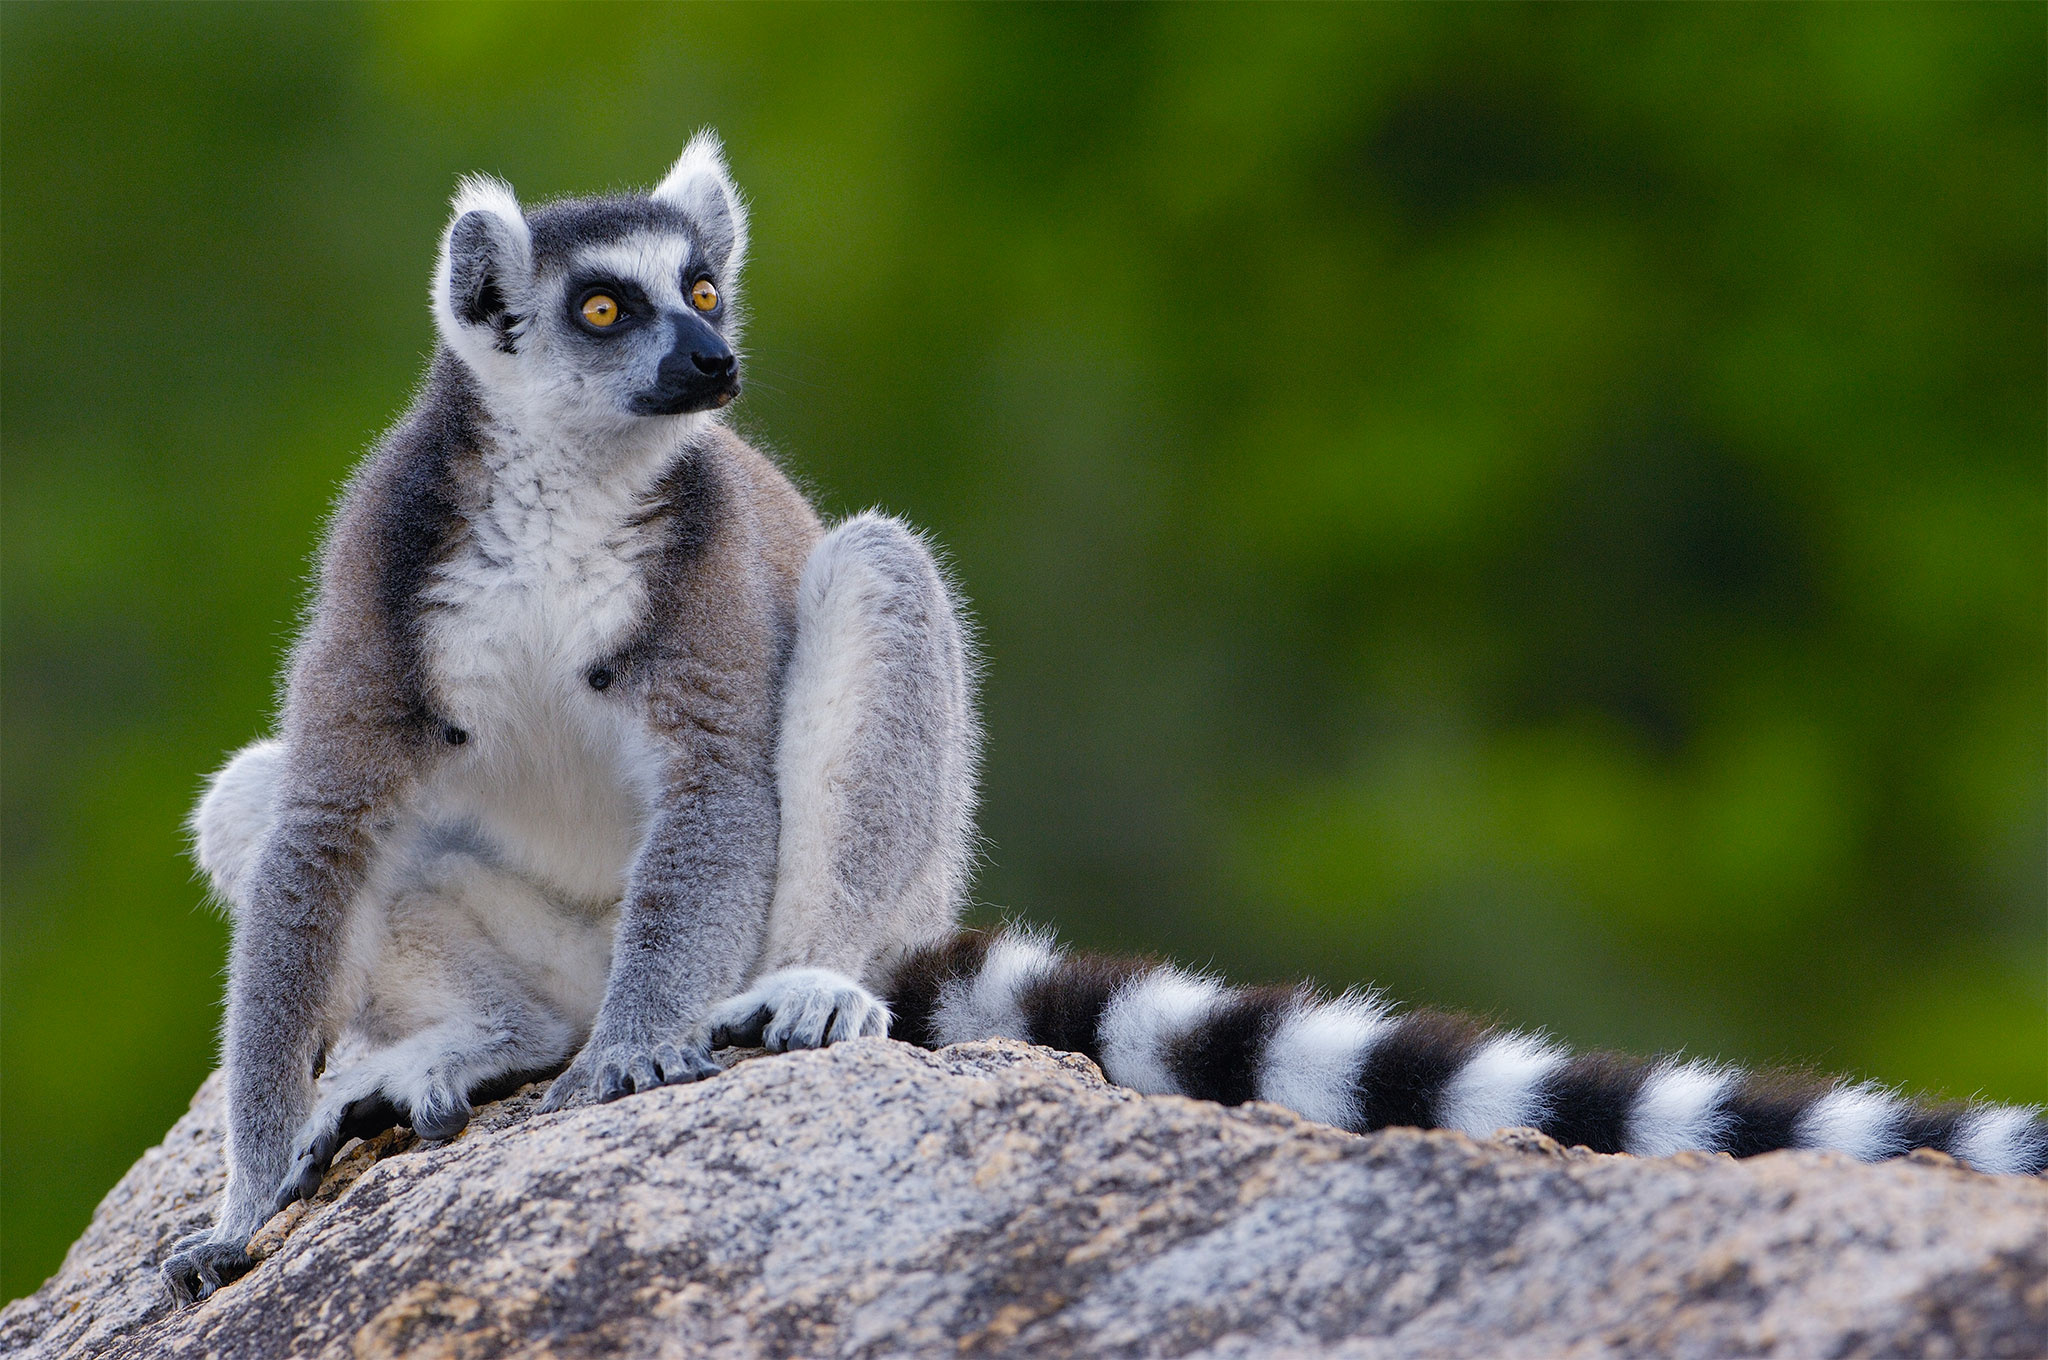 Lemur wallpapers, Animal photography, High-quality images, Nature's marvels, 2050x1360 HD Desktop